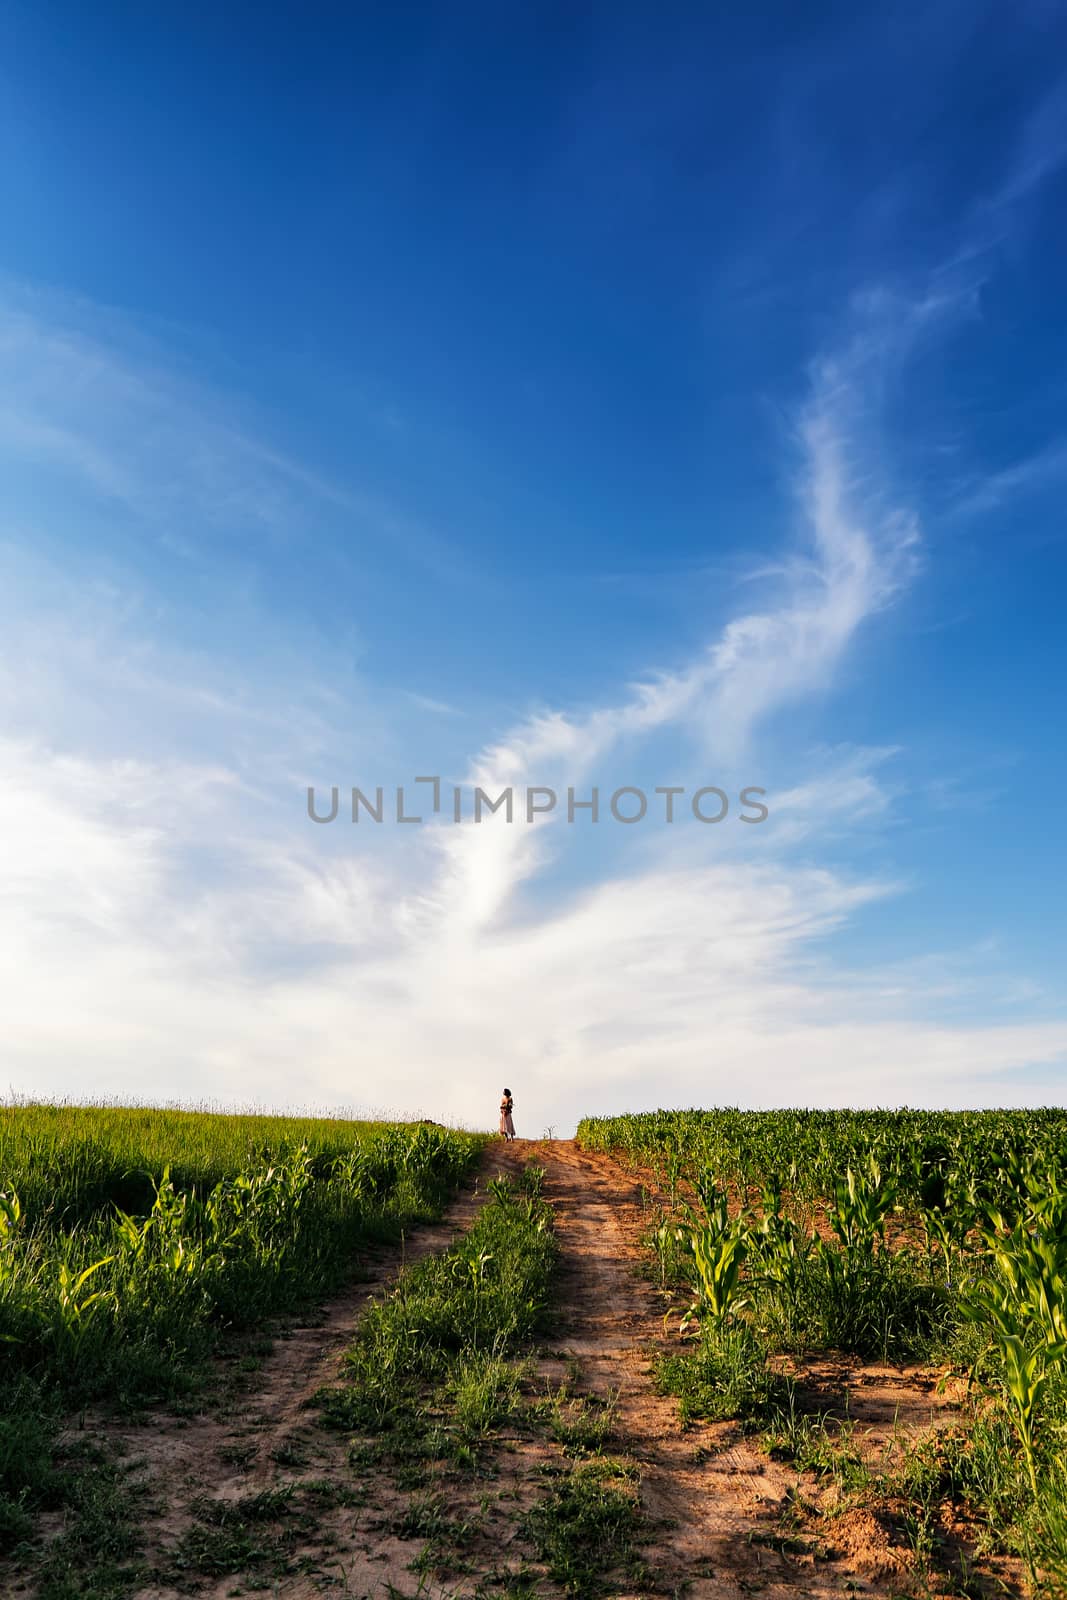 Lone woman standing on a dirt road leading off into the sky. Summer landscape with green corn cereals field. Ground road and clouds.